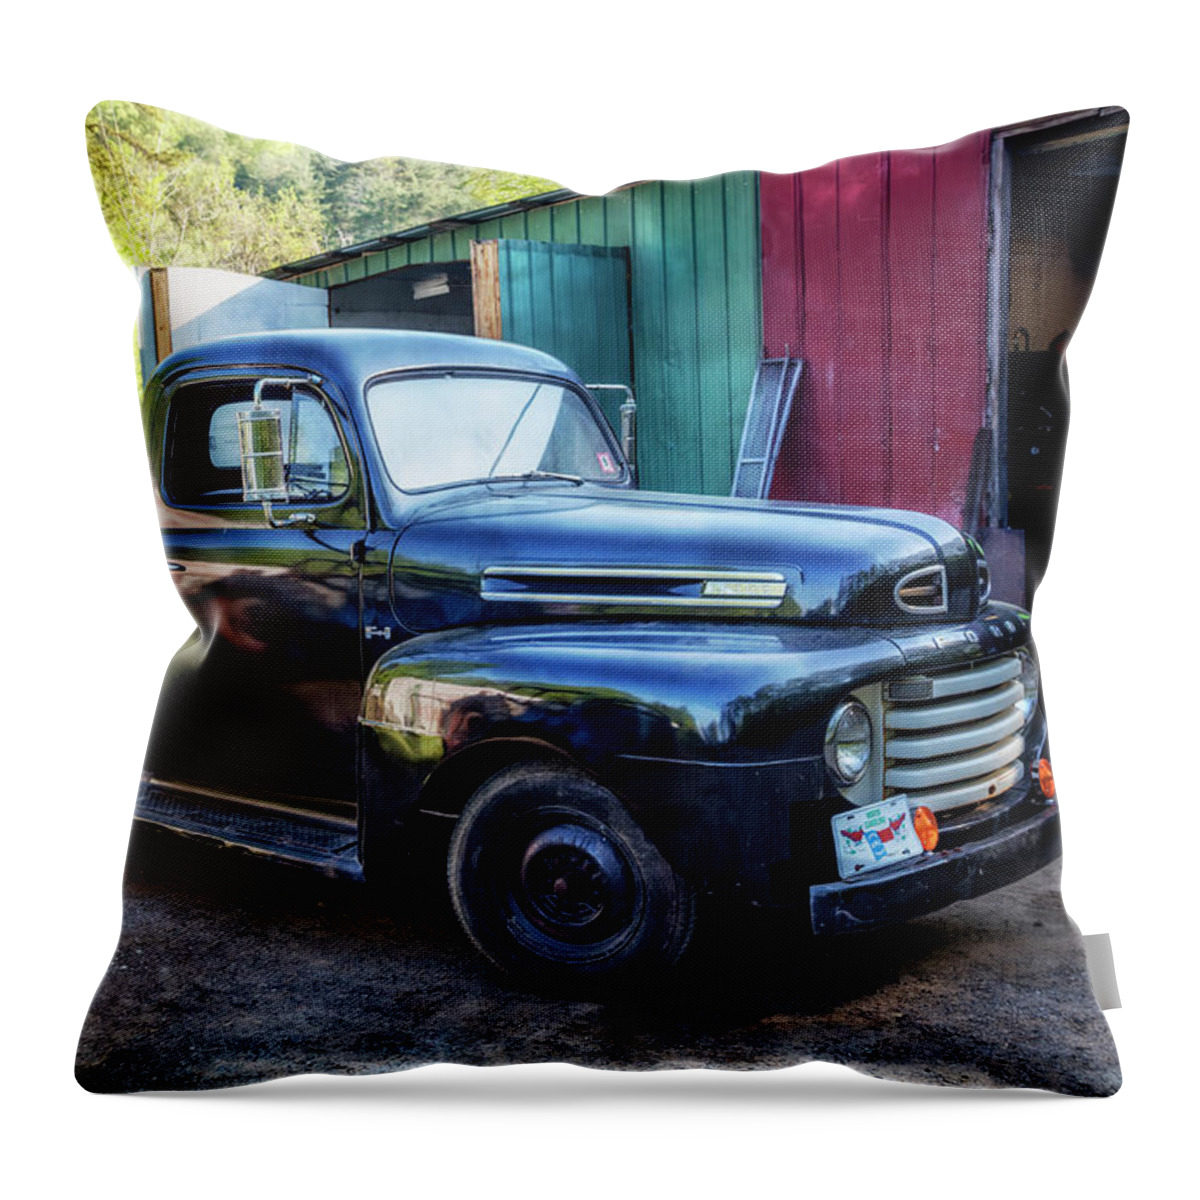 1948 Throw Pillow featuring the photograph Fords by Debra and Dave Vanderlaan